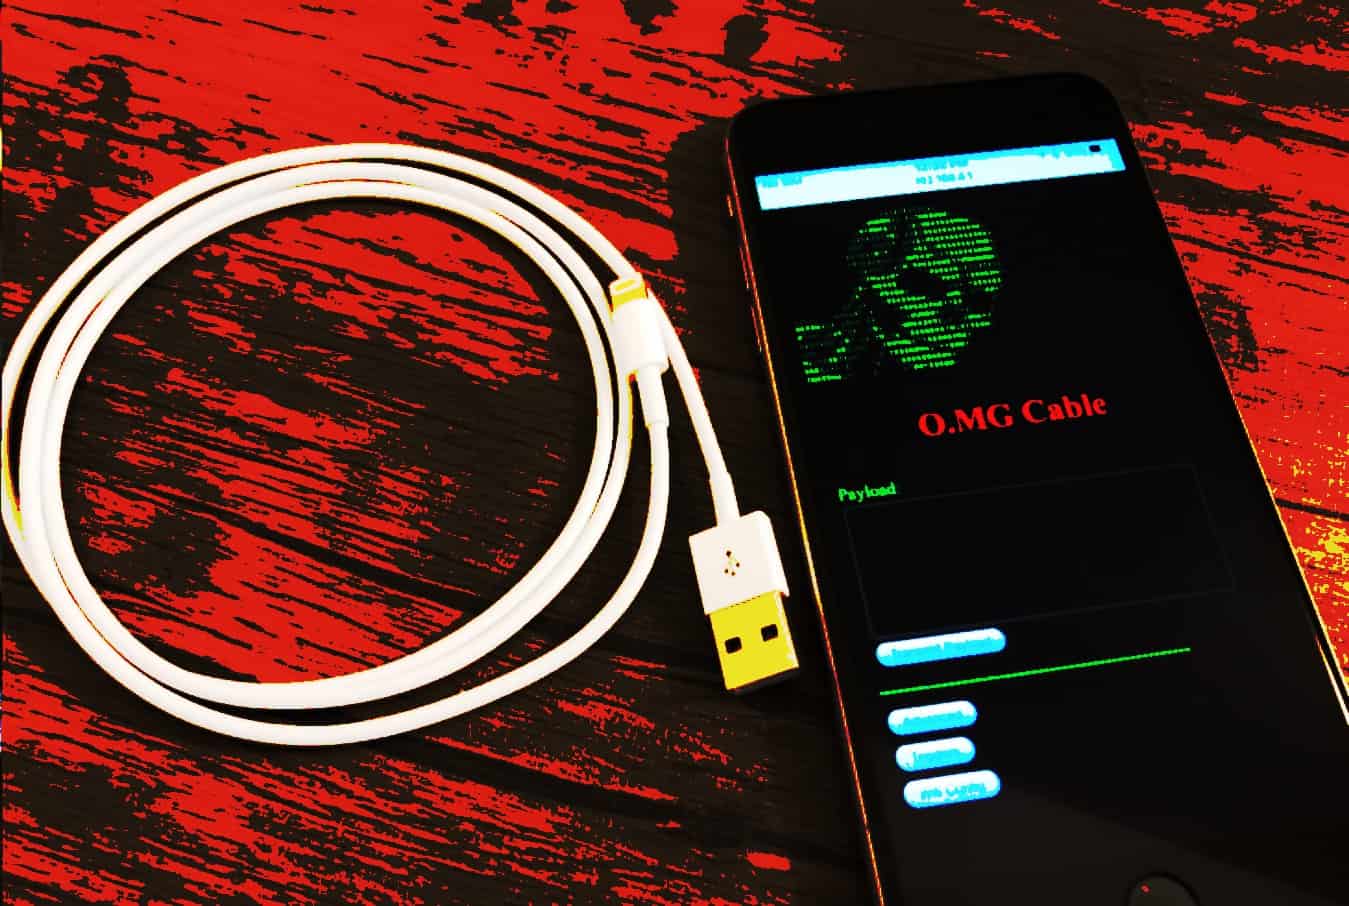 This iPhone charging cable can compromise your device & steal data